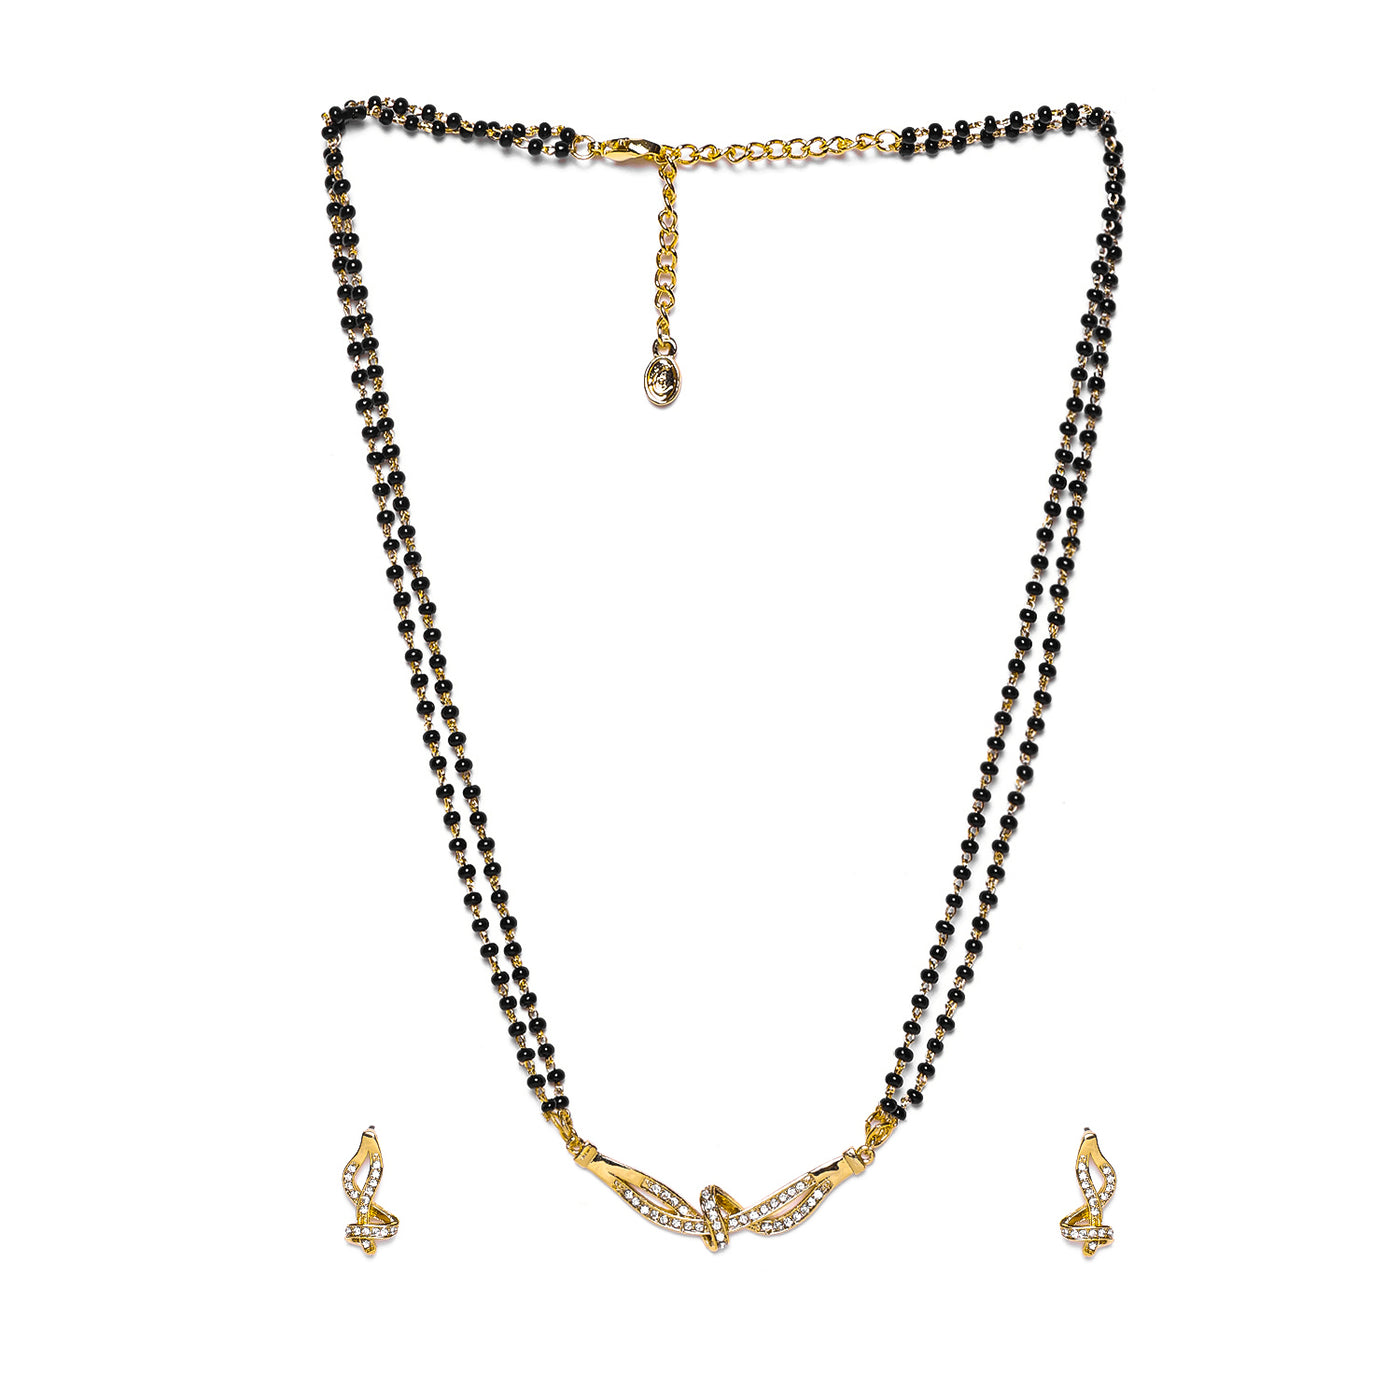 Estele Gold Plated Fascinating Mangalsutra Necklace Set with Austrian Crystals for Women